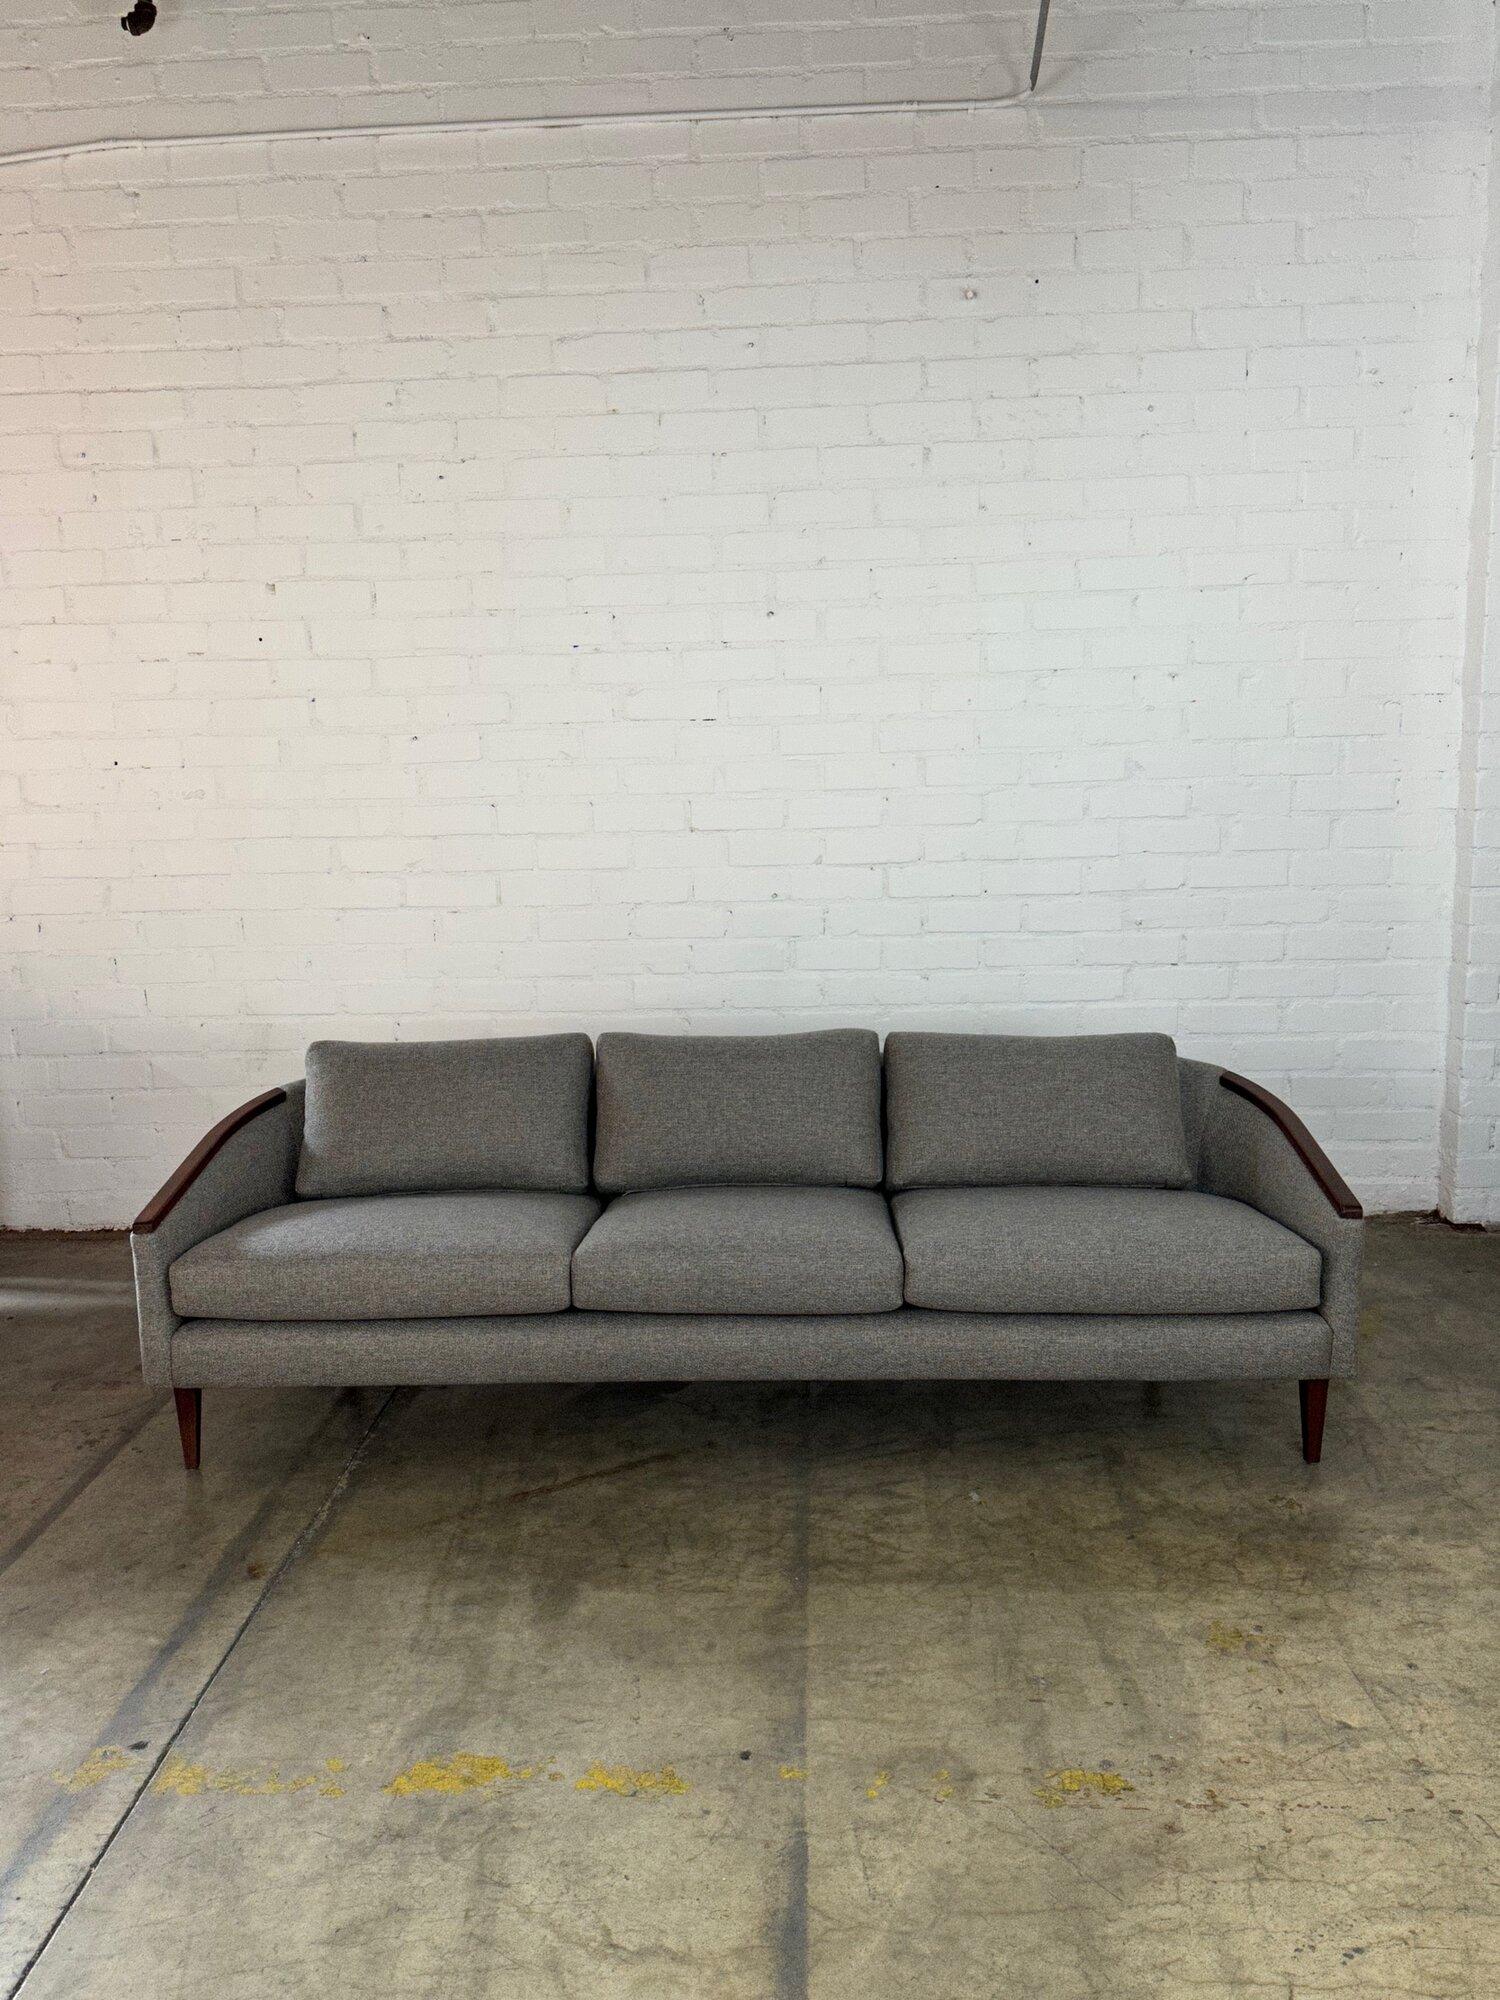 W91 D33 H25.5 SW84 SD18 SH18 AH21

Fully restored mid century low profile sofa. Item has a great barrel back curve, new foam and new soft tweed upholstery. Wooden surfaces are well preserved with no major areas of wear. Sofa is structurally sound